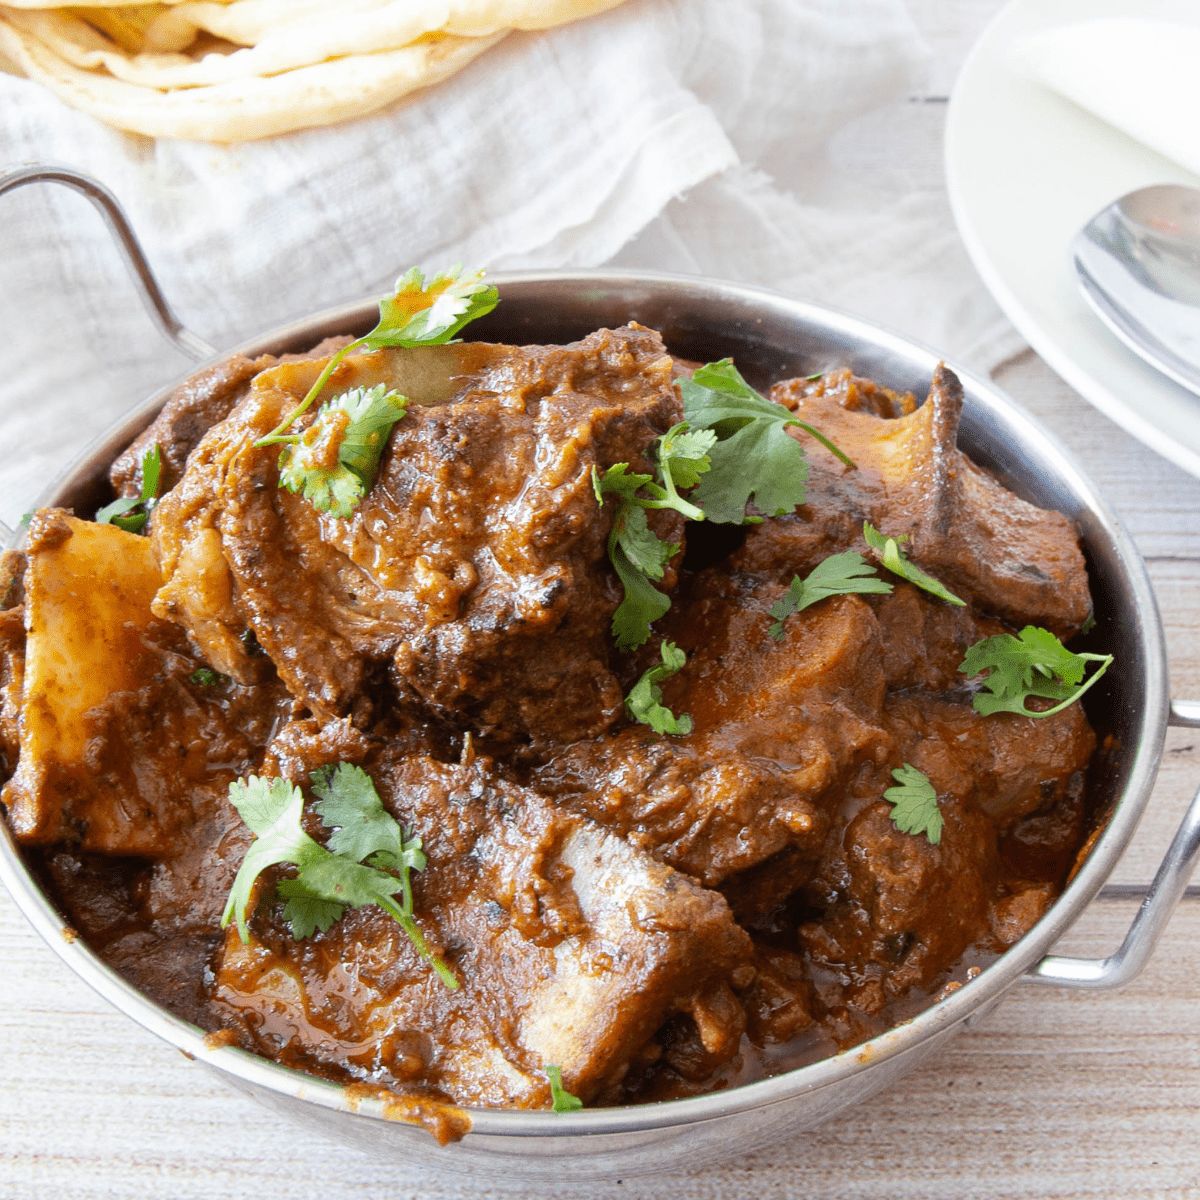 An Indian serving dish with mutton masala.